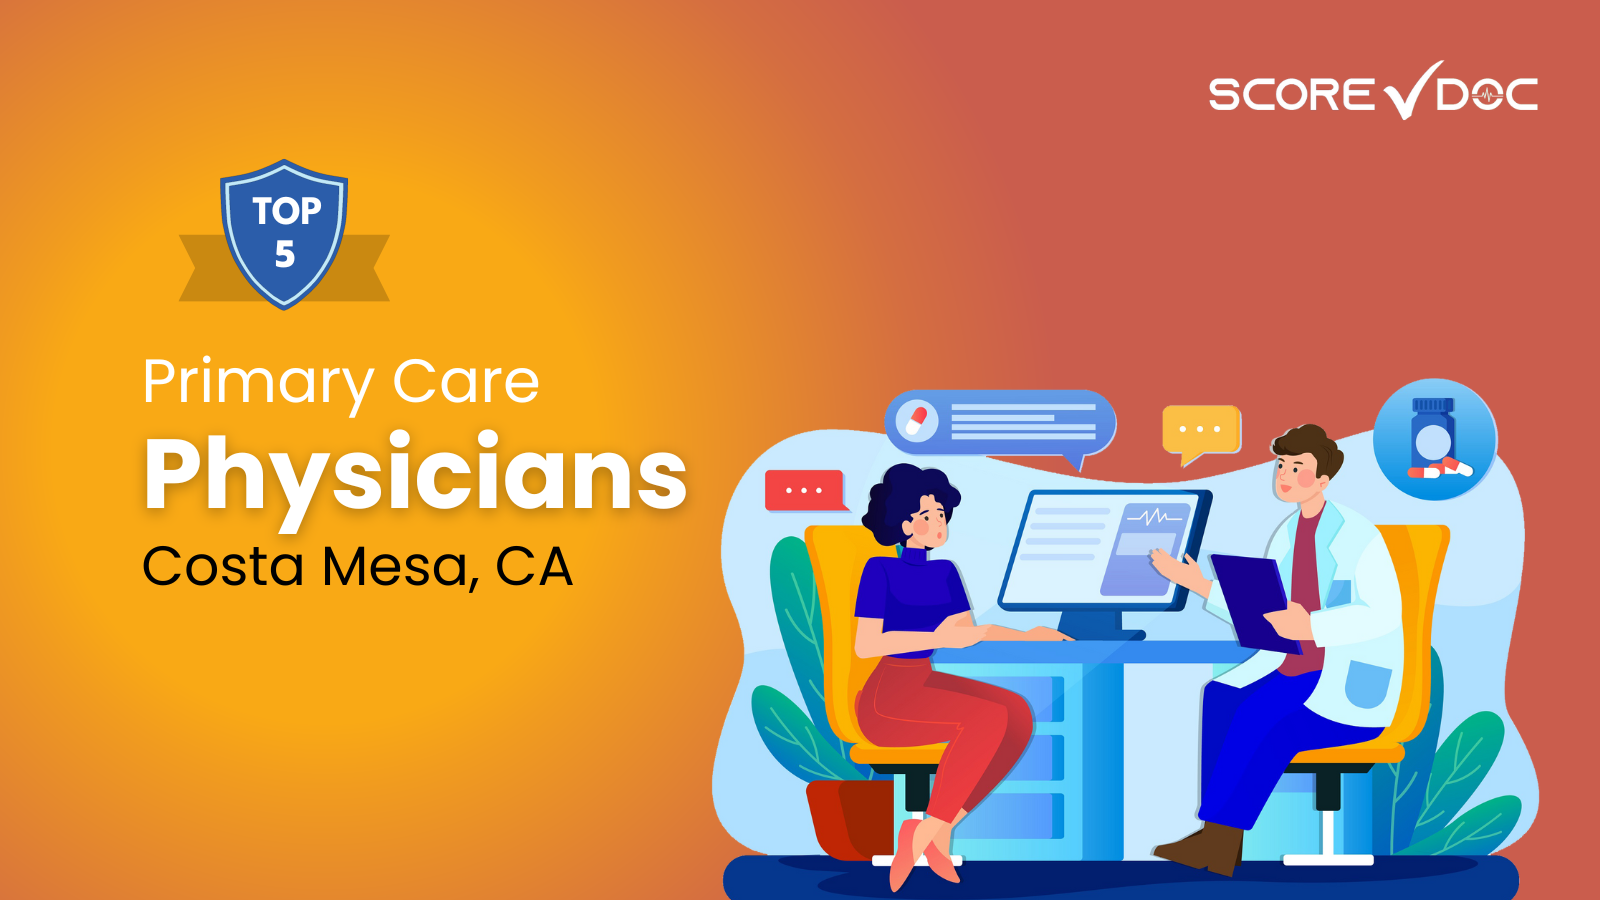 Top-Rated Primary Care Physicians in Costa Mesa, CA